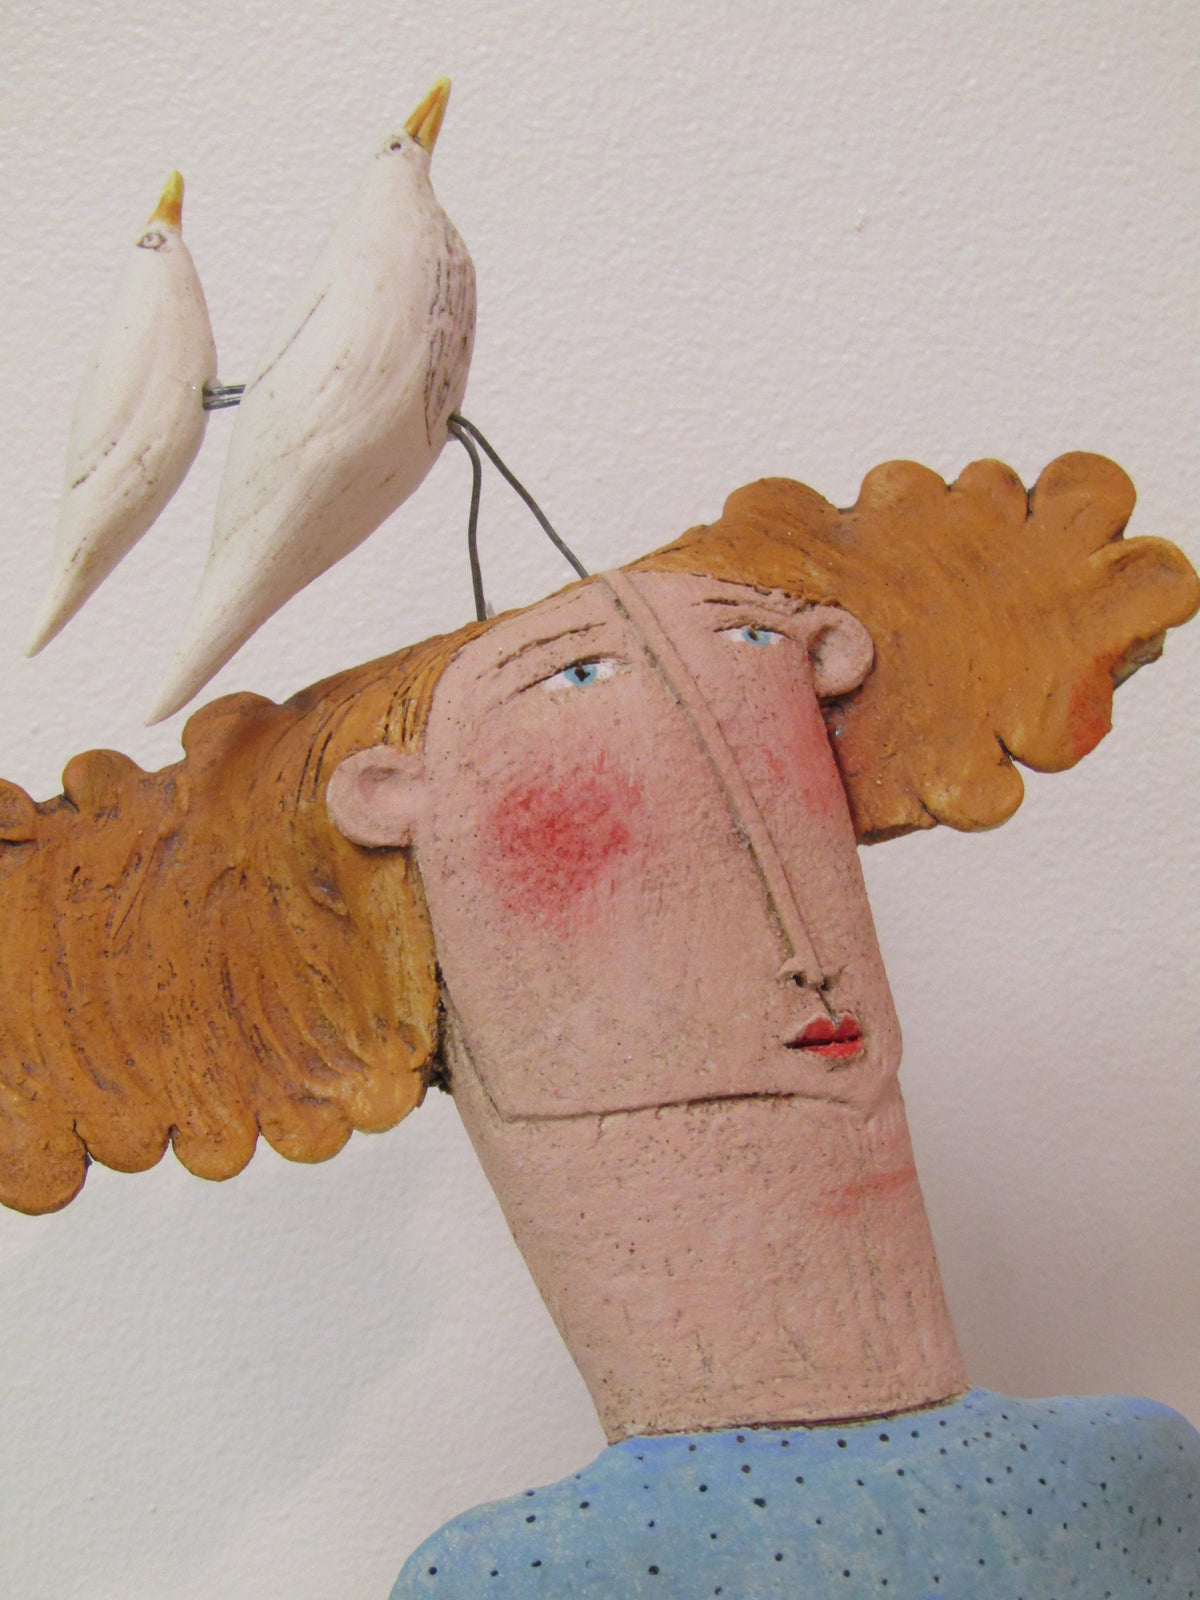 Tall Lady With Two White Birds On Her Head by Sarah Saunders